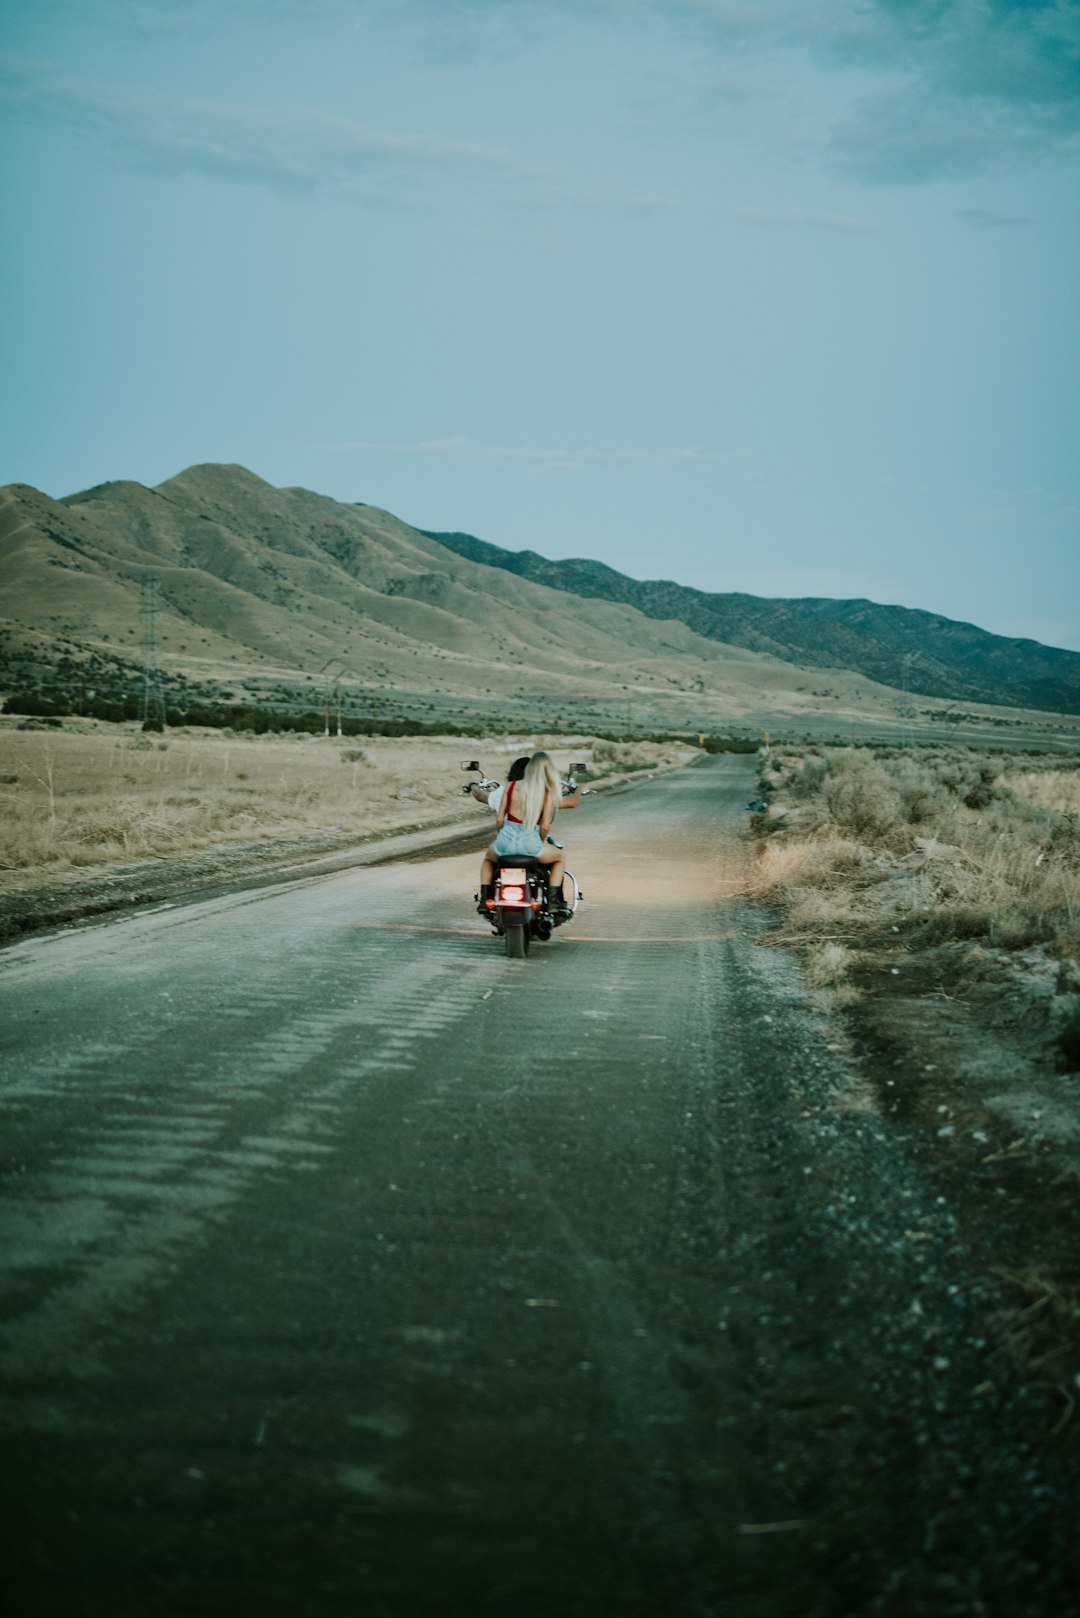 two person riding motorcycle on road viewing mountain